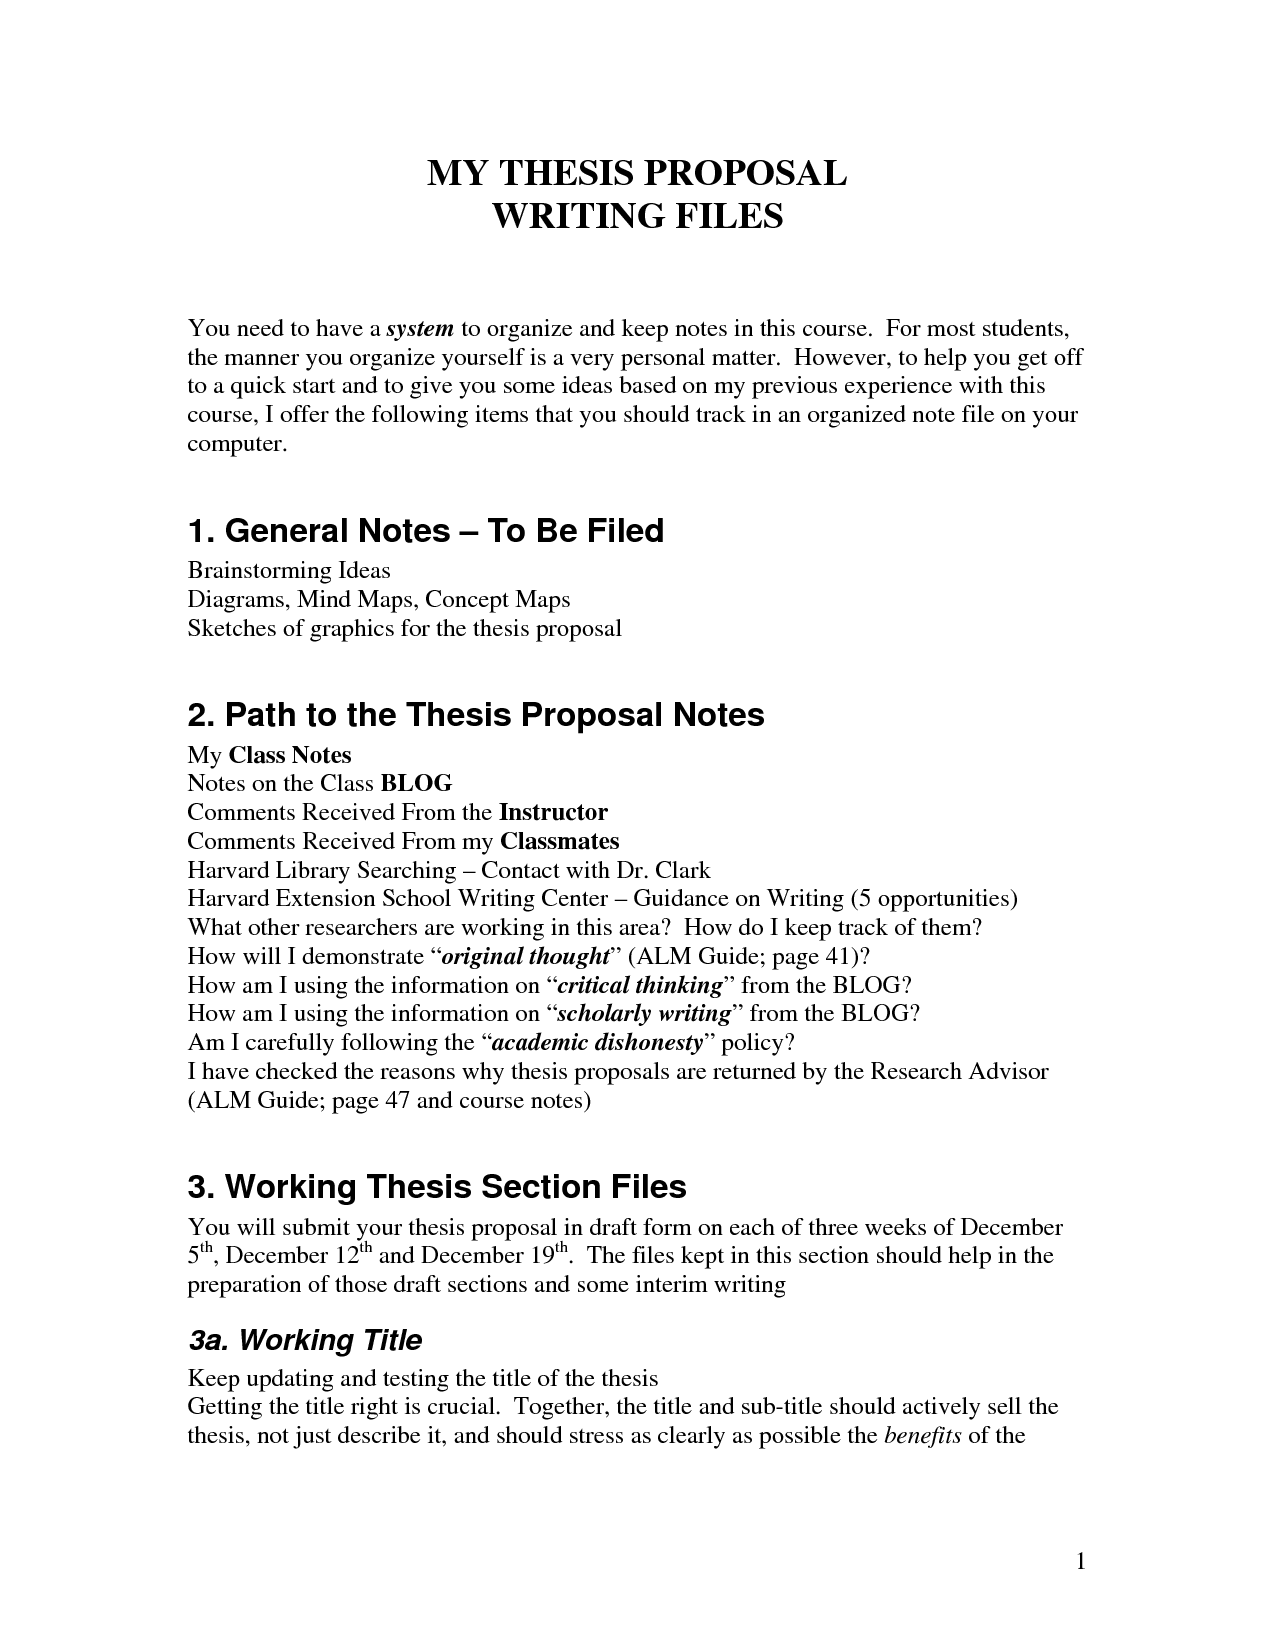 Sample of proposal writing for thesis